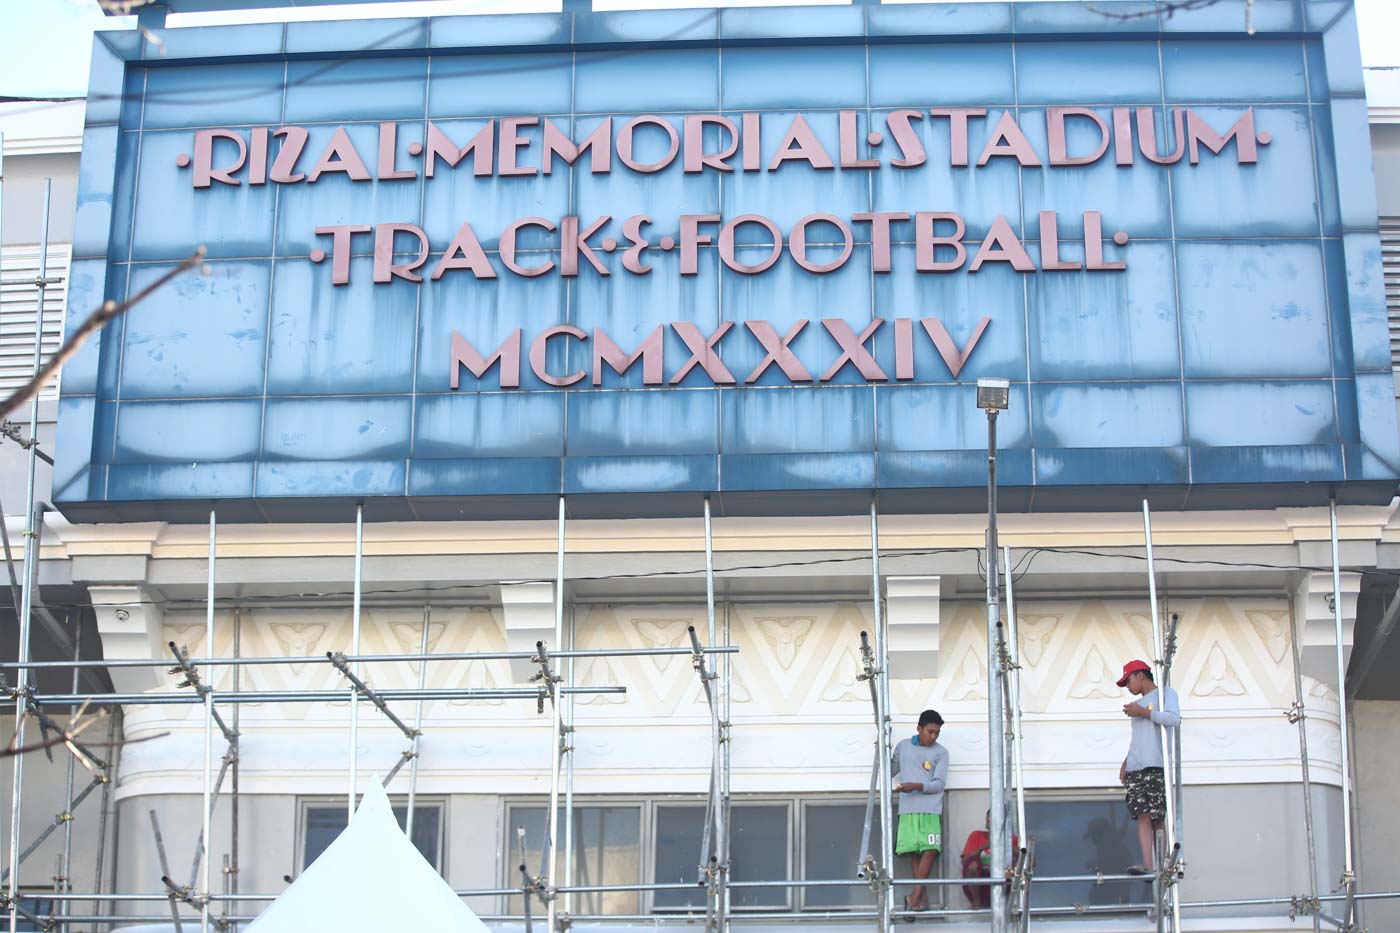 UNFINISHED. Metal scaffoldings remain around the Rizal Memorial Stadium. Photo by Ben Nabong/Rappler  